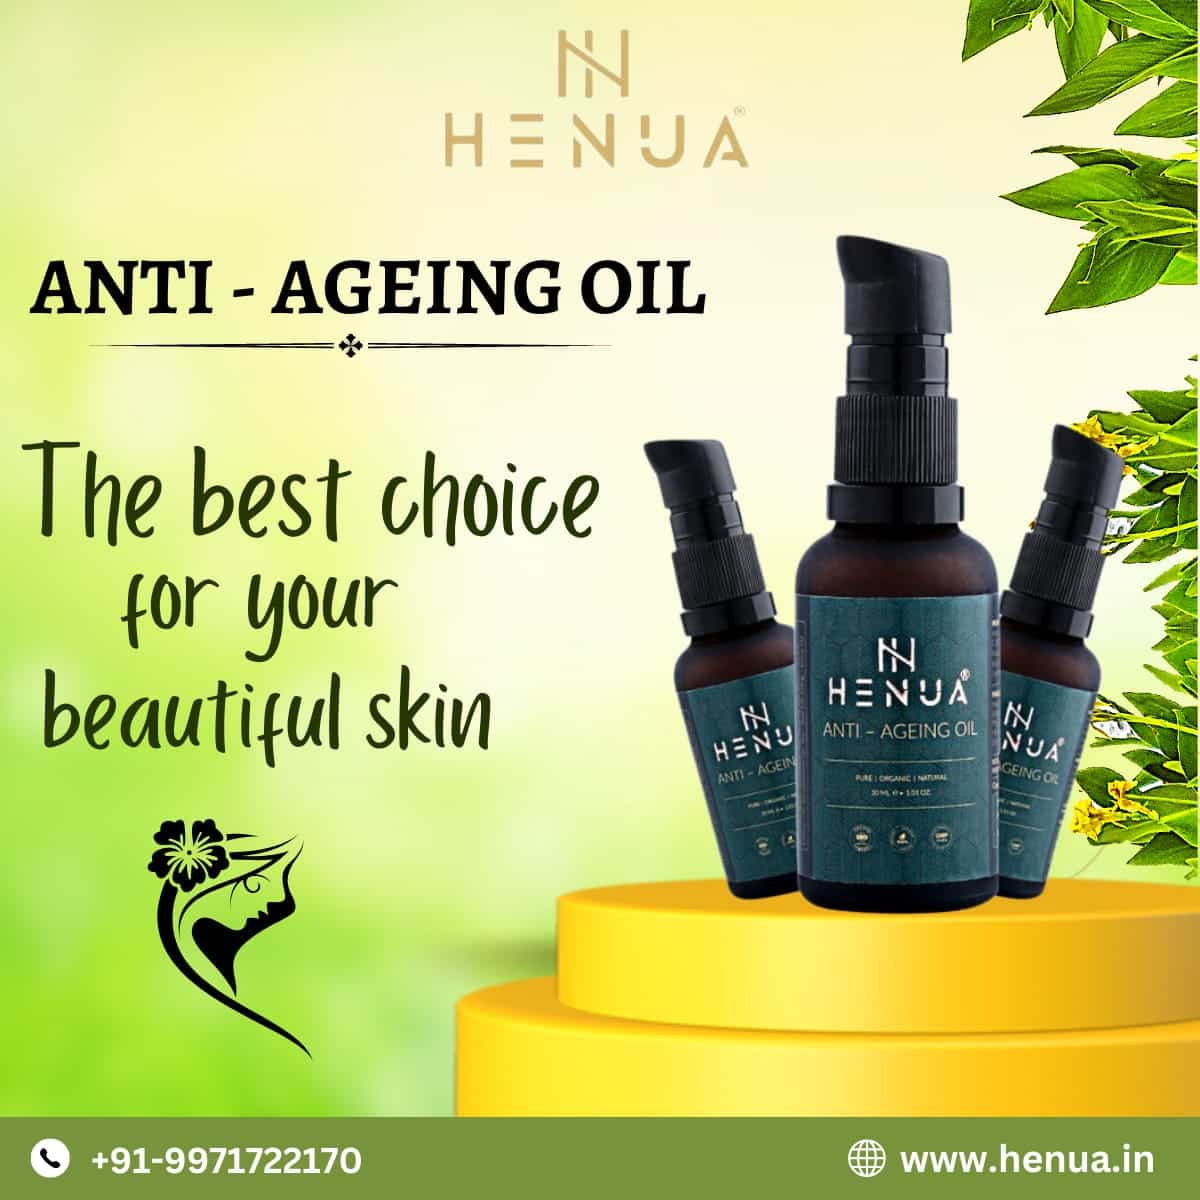 With-Henua-Anti-Ageing-Oil-Reduce-Ageing-Signs